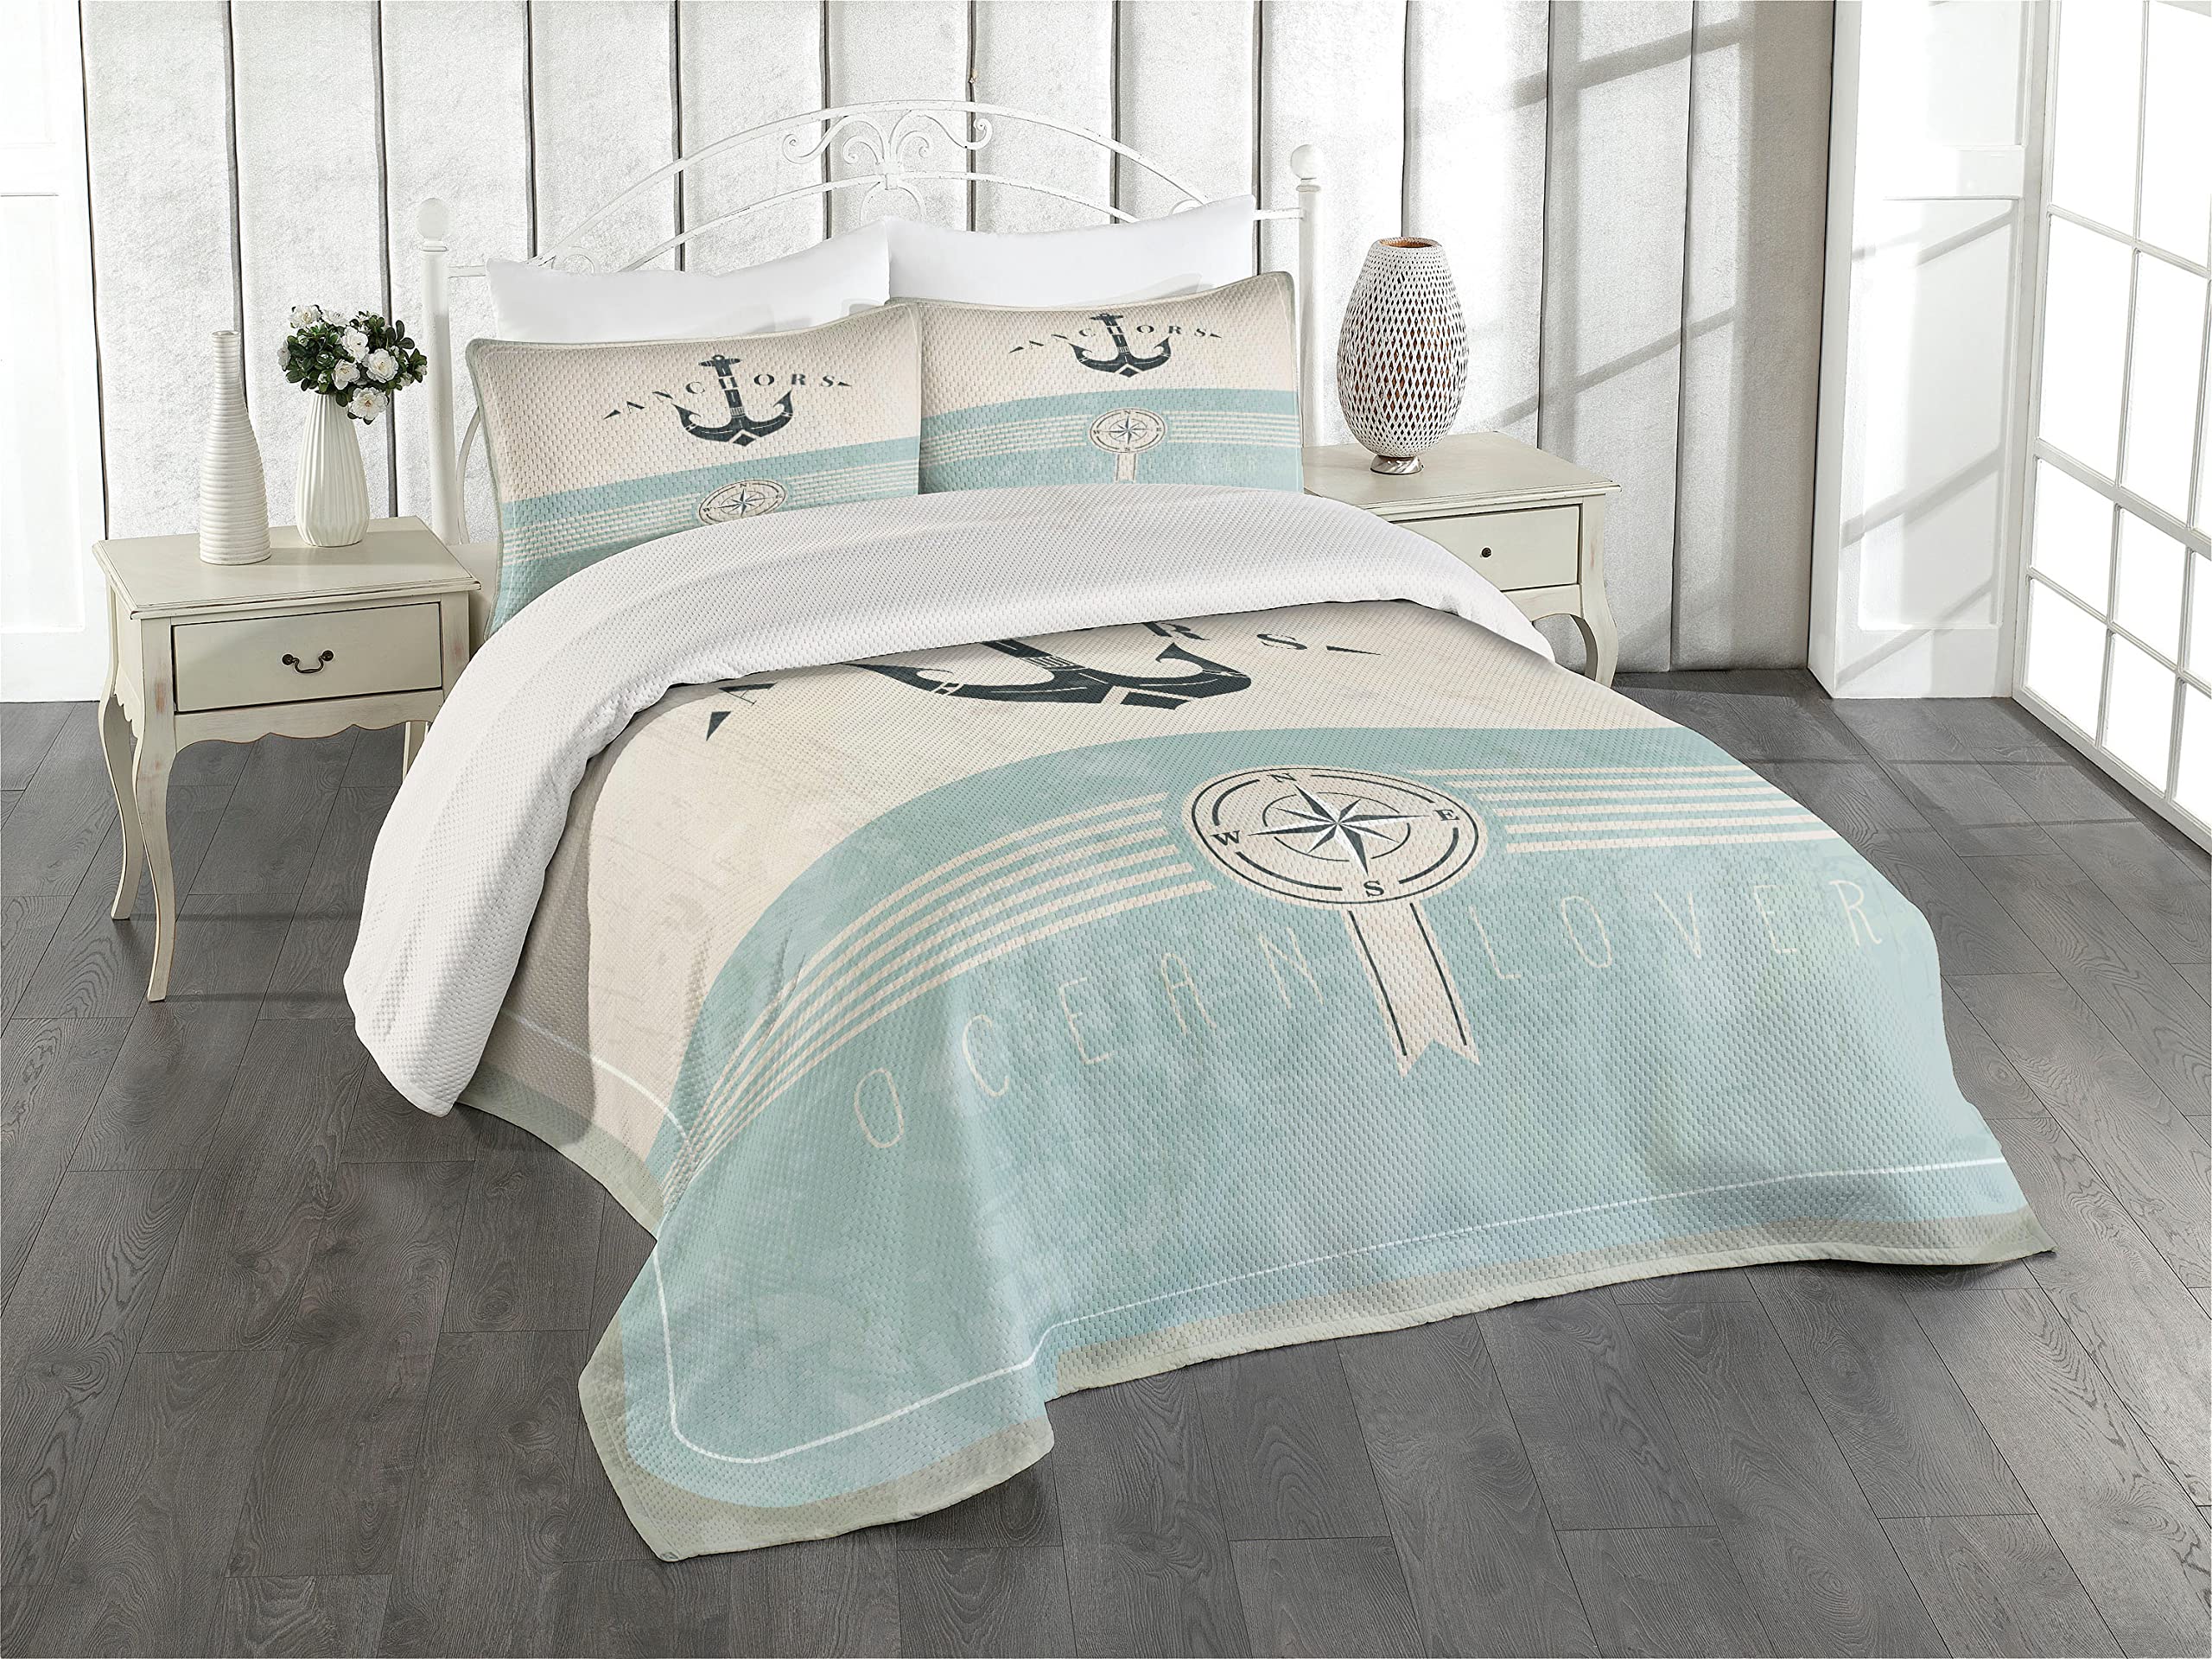 Lunarable Nautical Coverlet Set Twin Size, Aged Ocean Lover Phrase with Anchor and Compass Marine Adventure Design, 2 Piece Deco